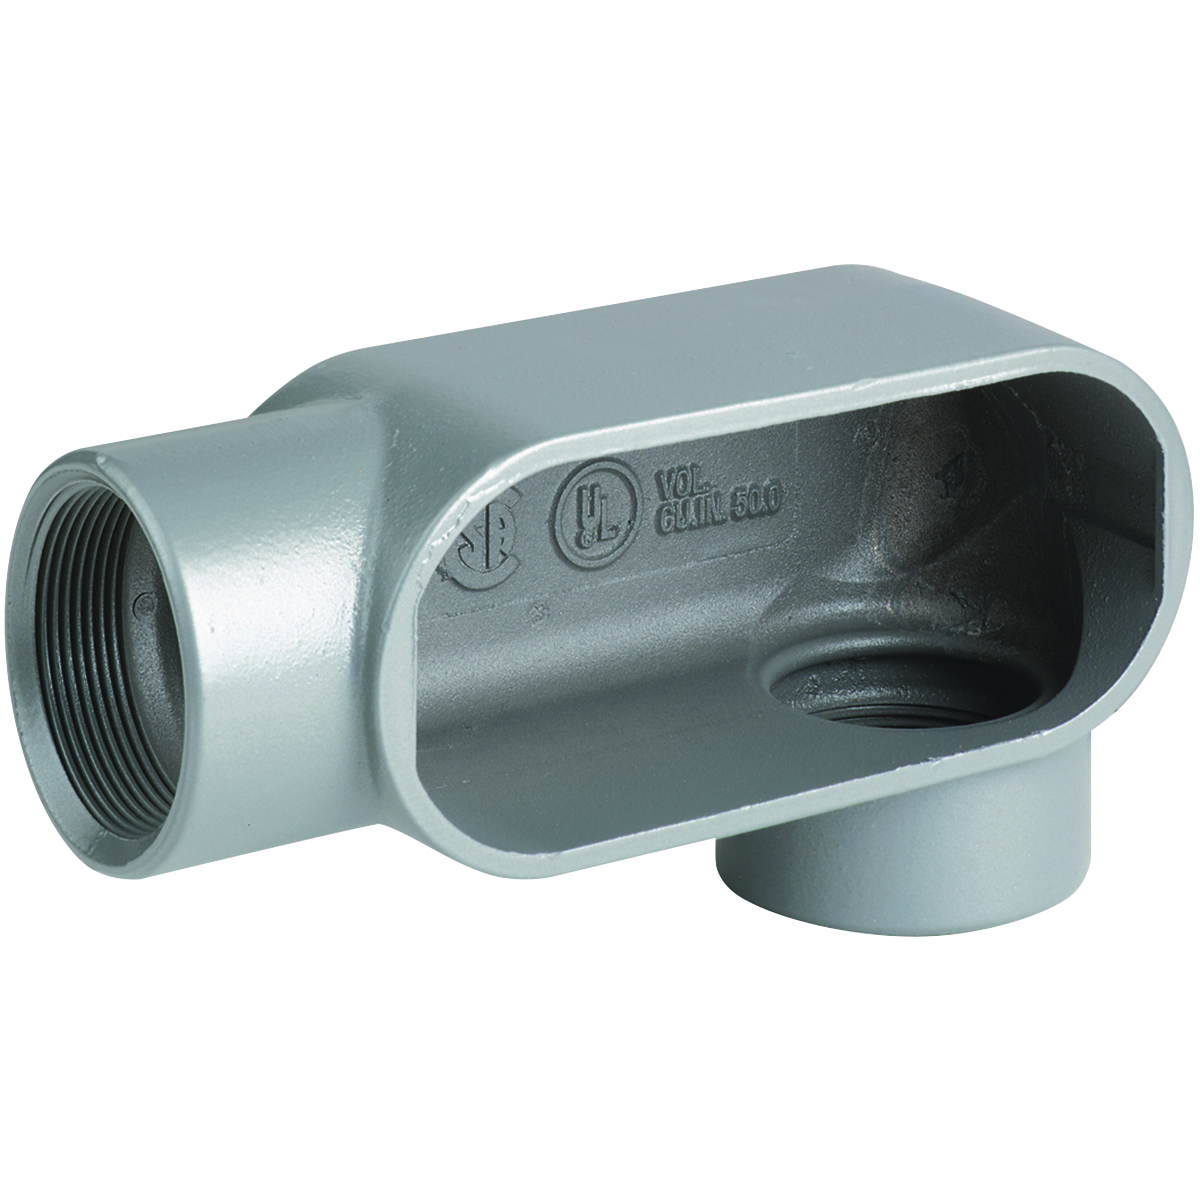 DURALOY 7 SERIES - IRON CONDUIT BODY - LL TYPE - HUB SIZE 2-1/2 INCH -VOLUME 131.5 CUBIC INCHES